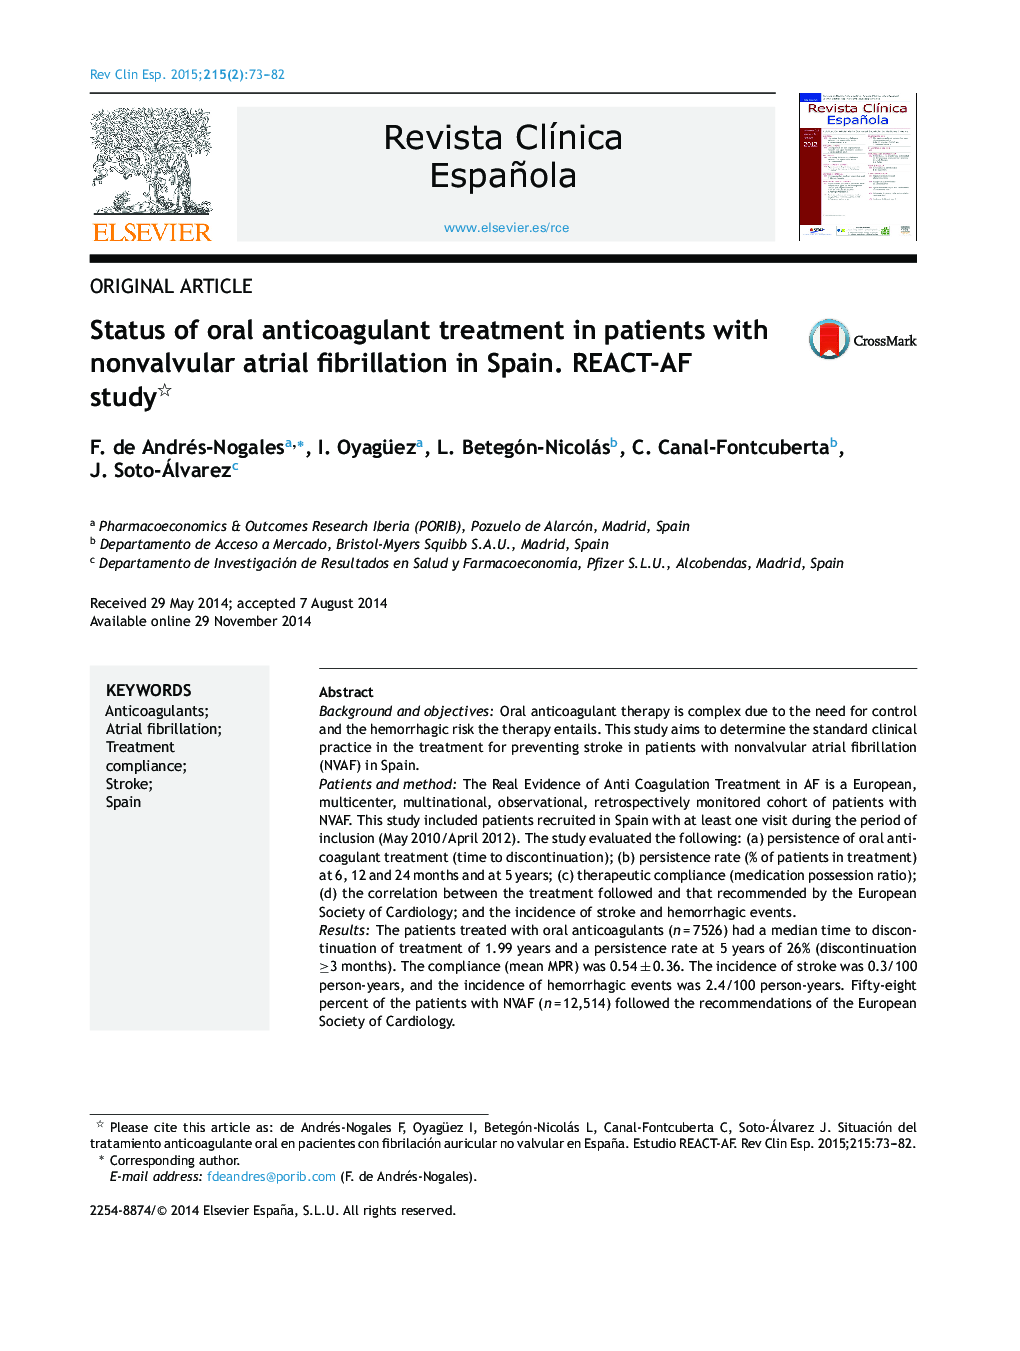 Status of oral anticoagulant treatment in patients with nonvalvular atrial fibrillation in Spain. REACT-AF study 